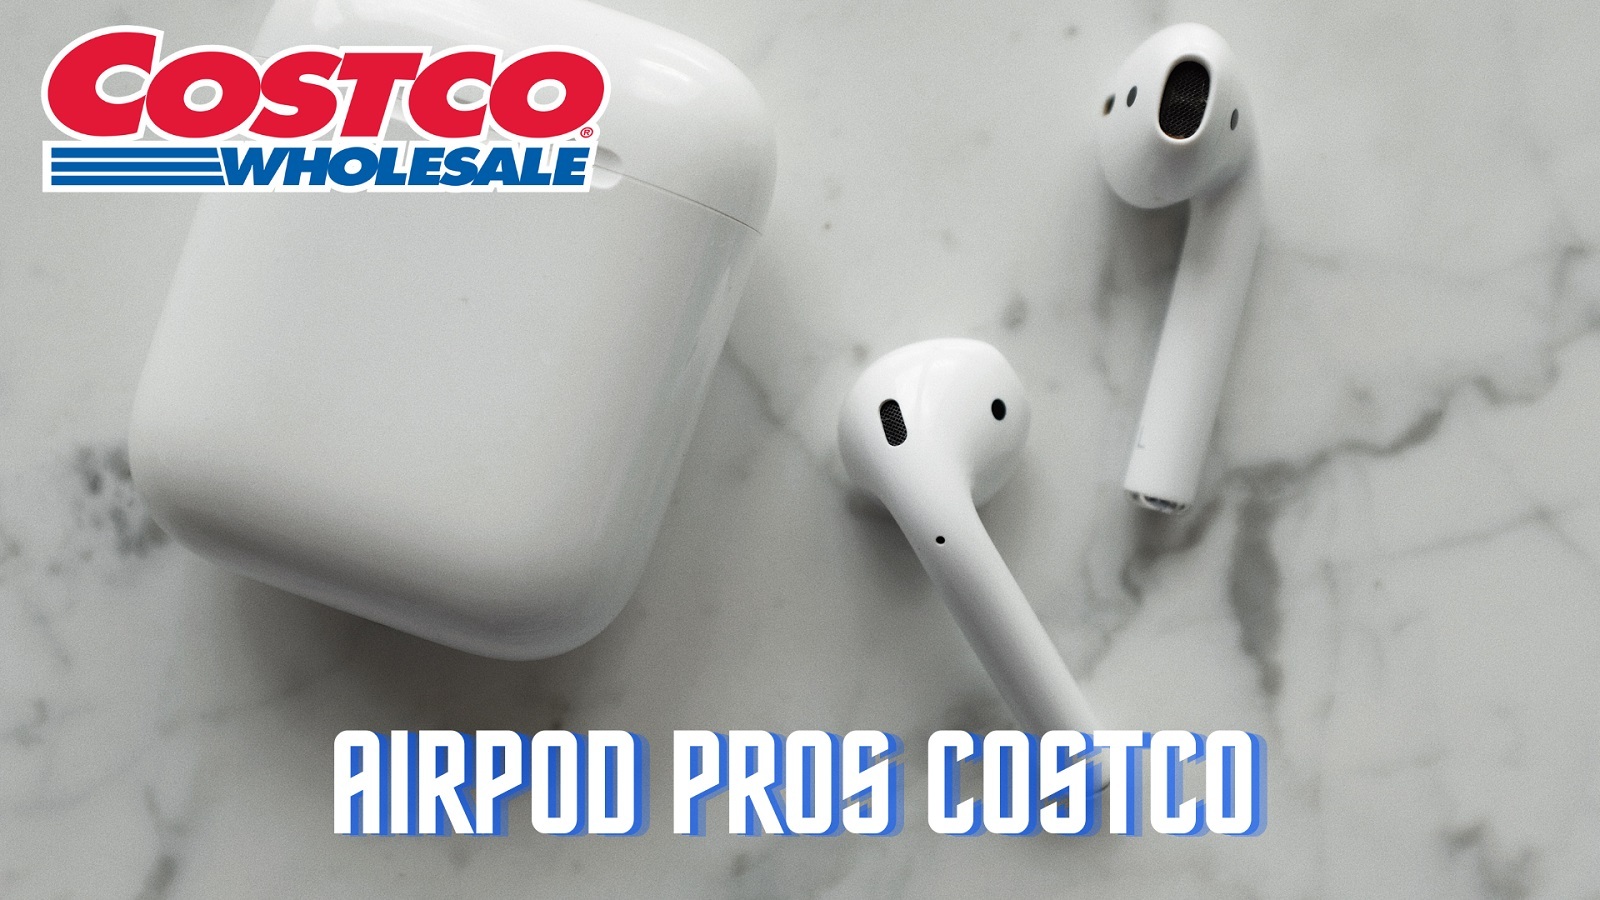 Costco Airpods: Is It Safe to Buy & What Is the Return Policy?